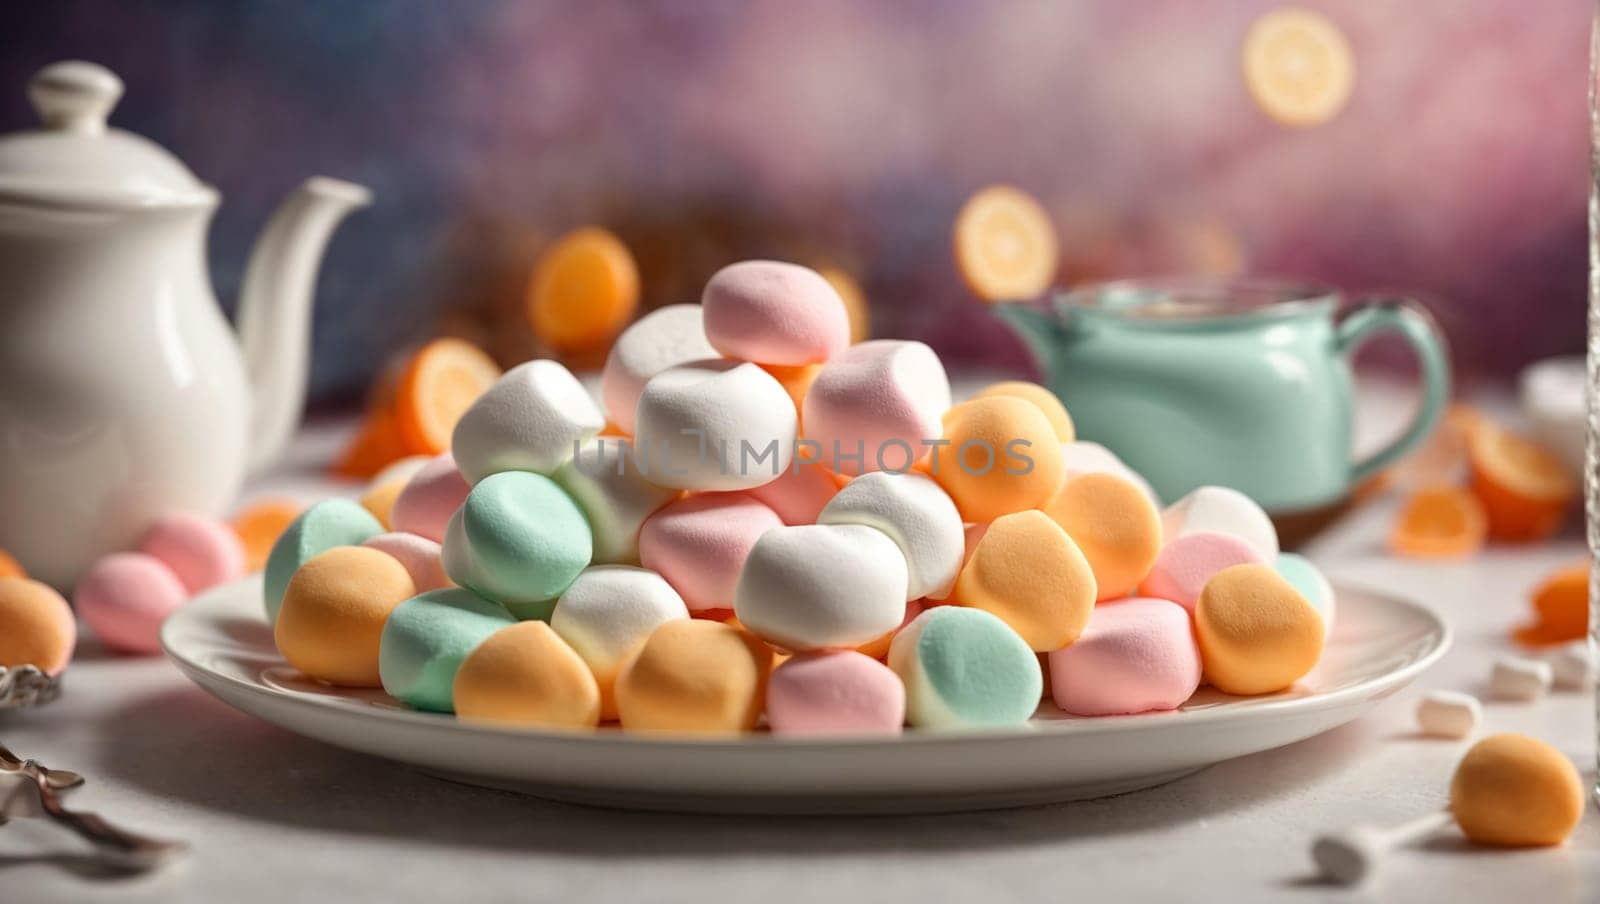 Colorful marshmallows delightfully beautiful round marshmallows lying on a plate. sweets for tea